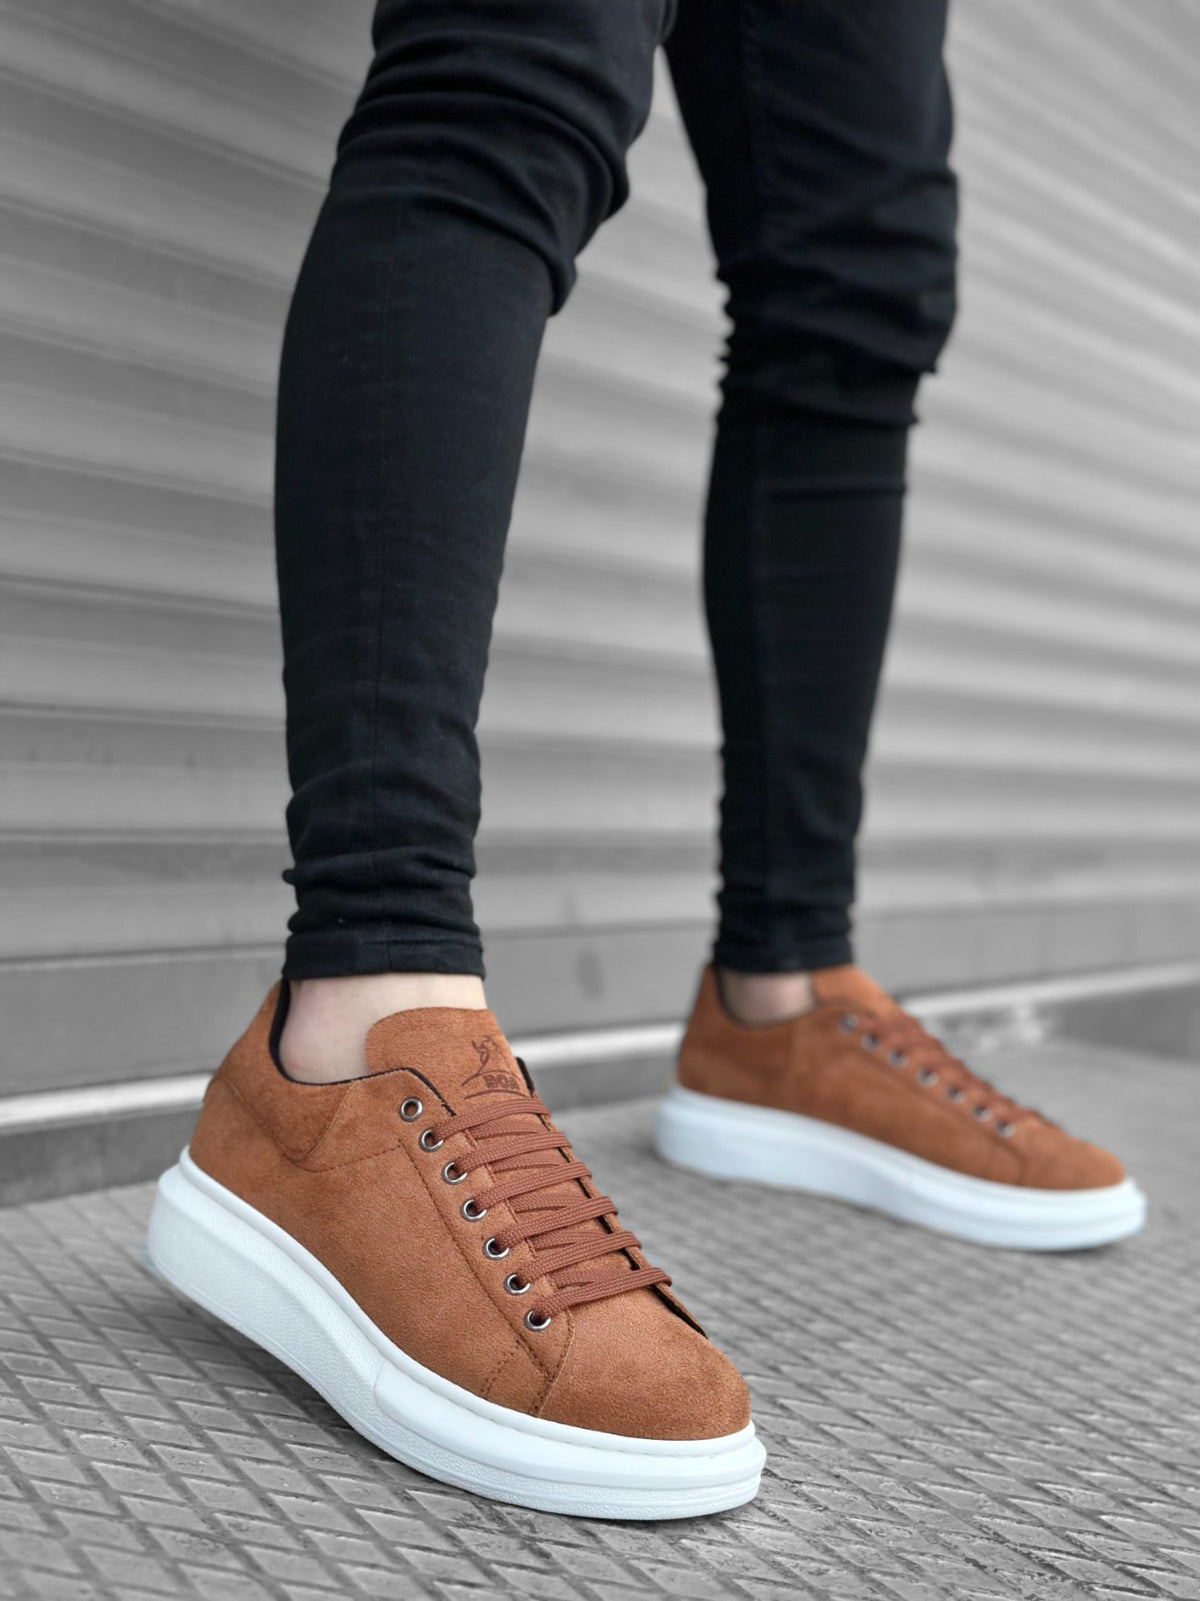 BA0547 Thick High Sole Tan Suede Lace-up Sports Men's Sneakers Shoes - STREETMODE™